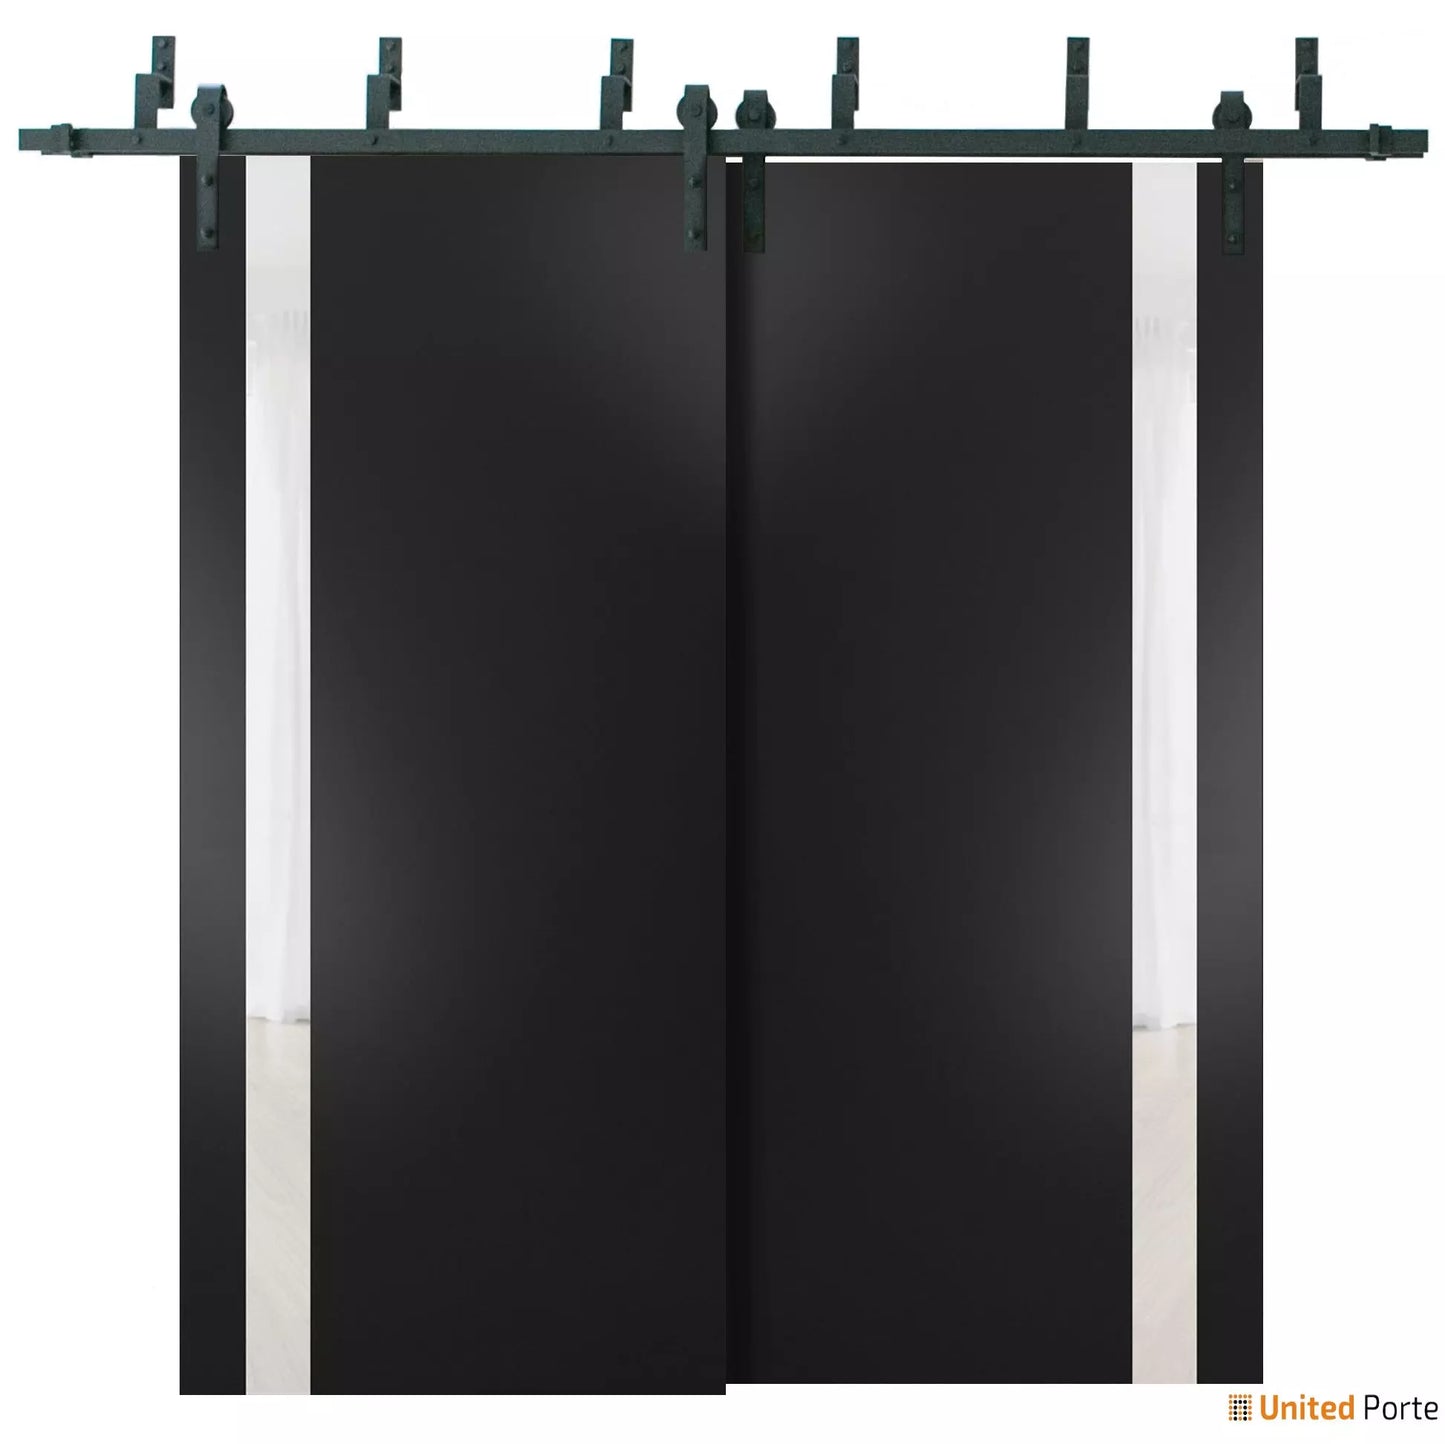 Planum 0040 Matte Black Double Barn Door with White Glass and Black Bypass Rail